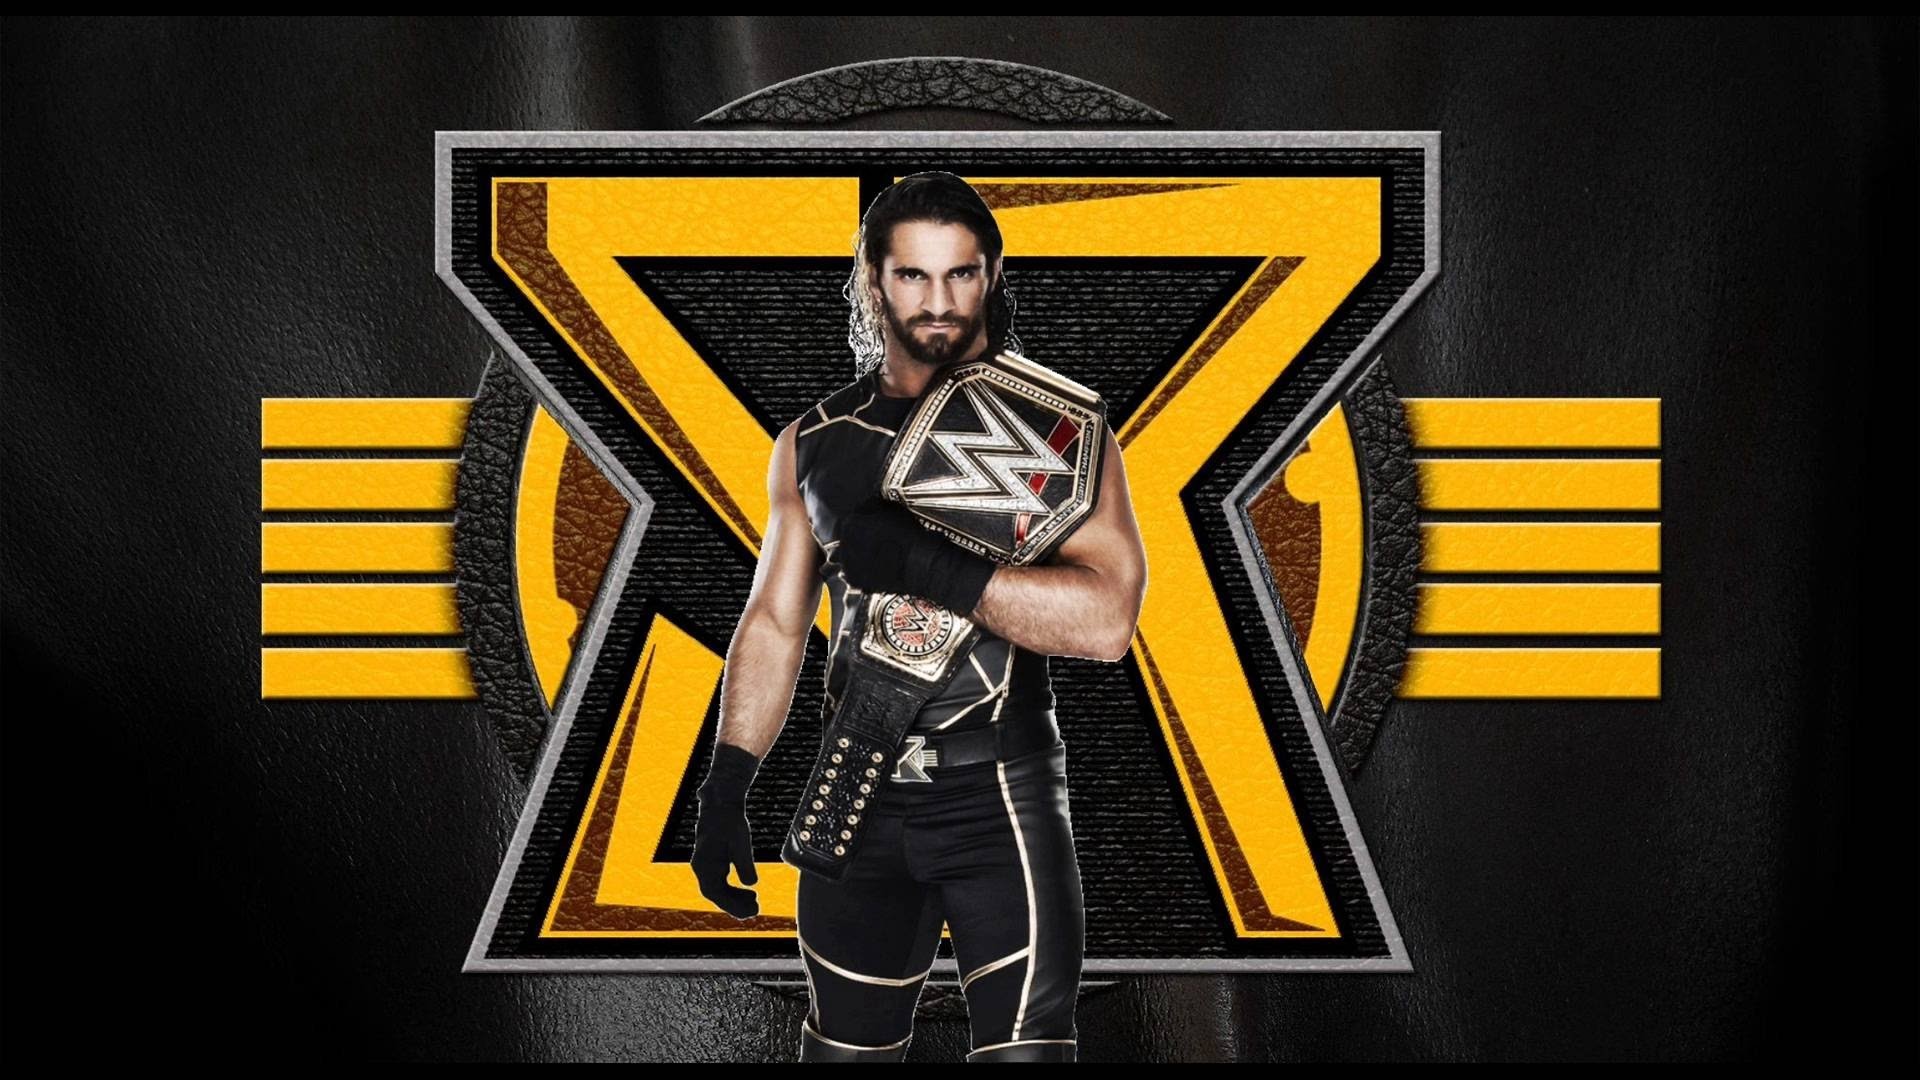 1920x1080 Seth Rollins Wallpapers